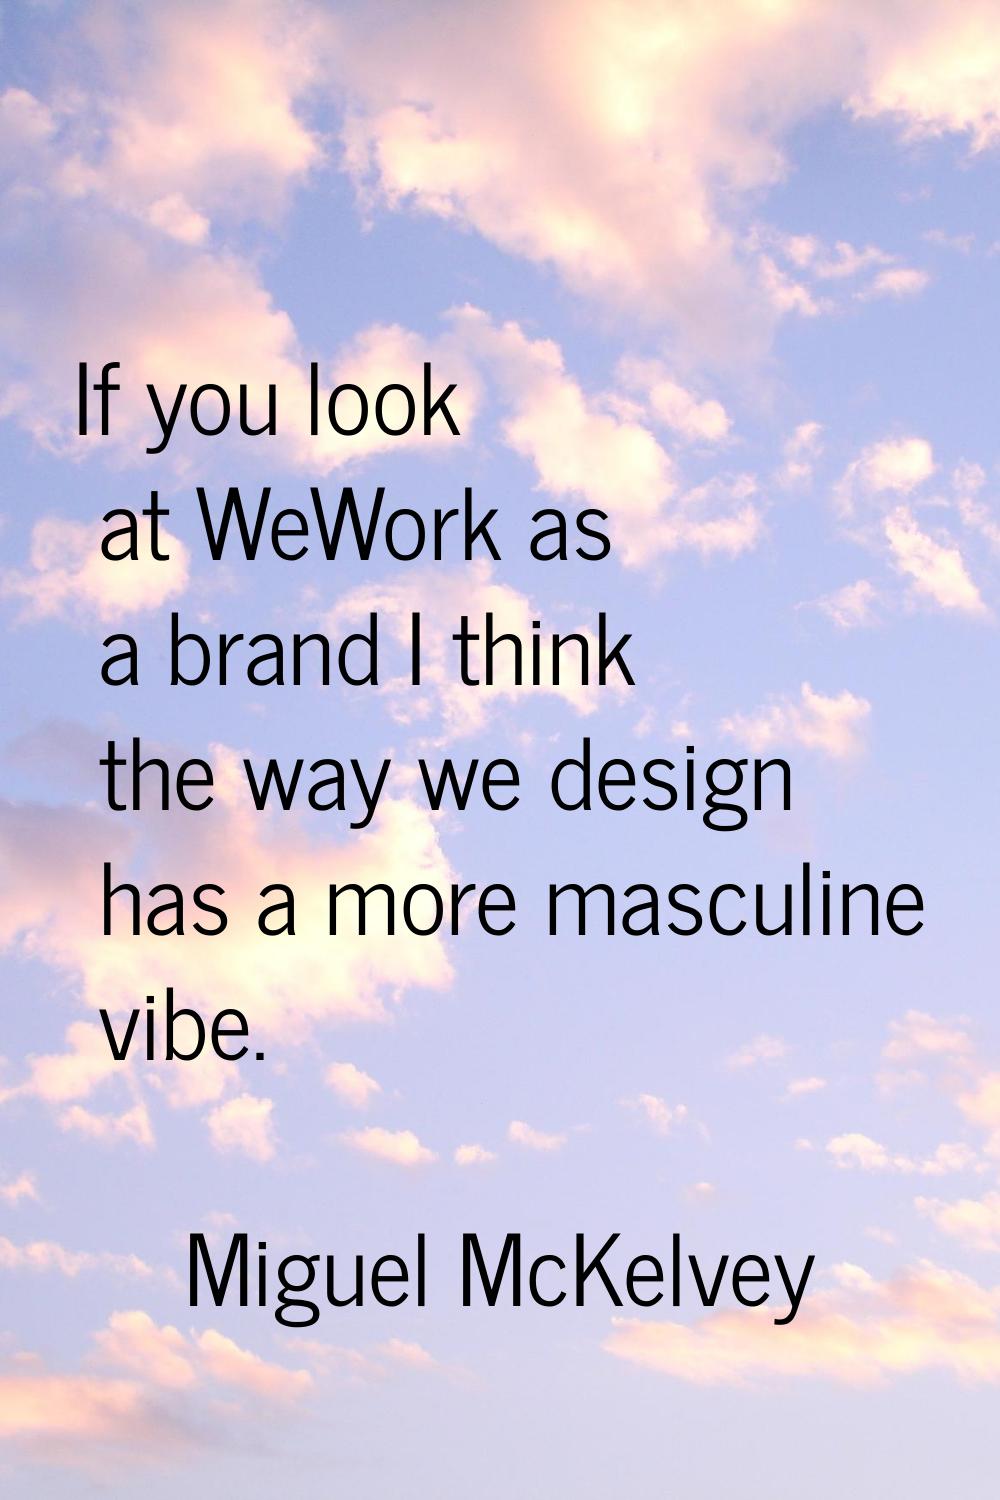 If you look at WeWork as a brand I think the way we design has a more masculine vibe.